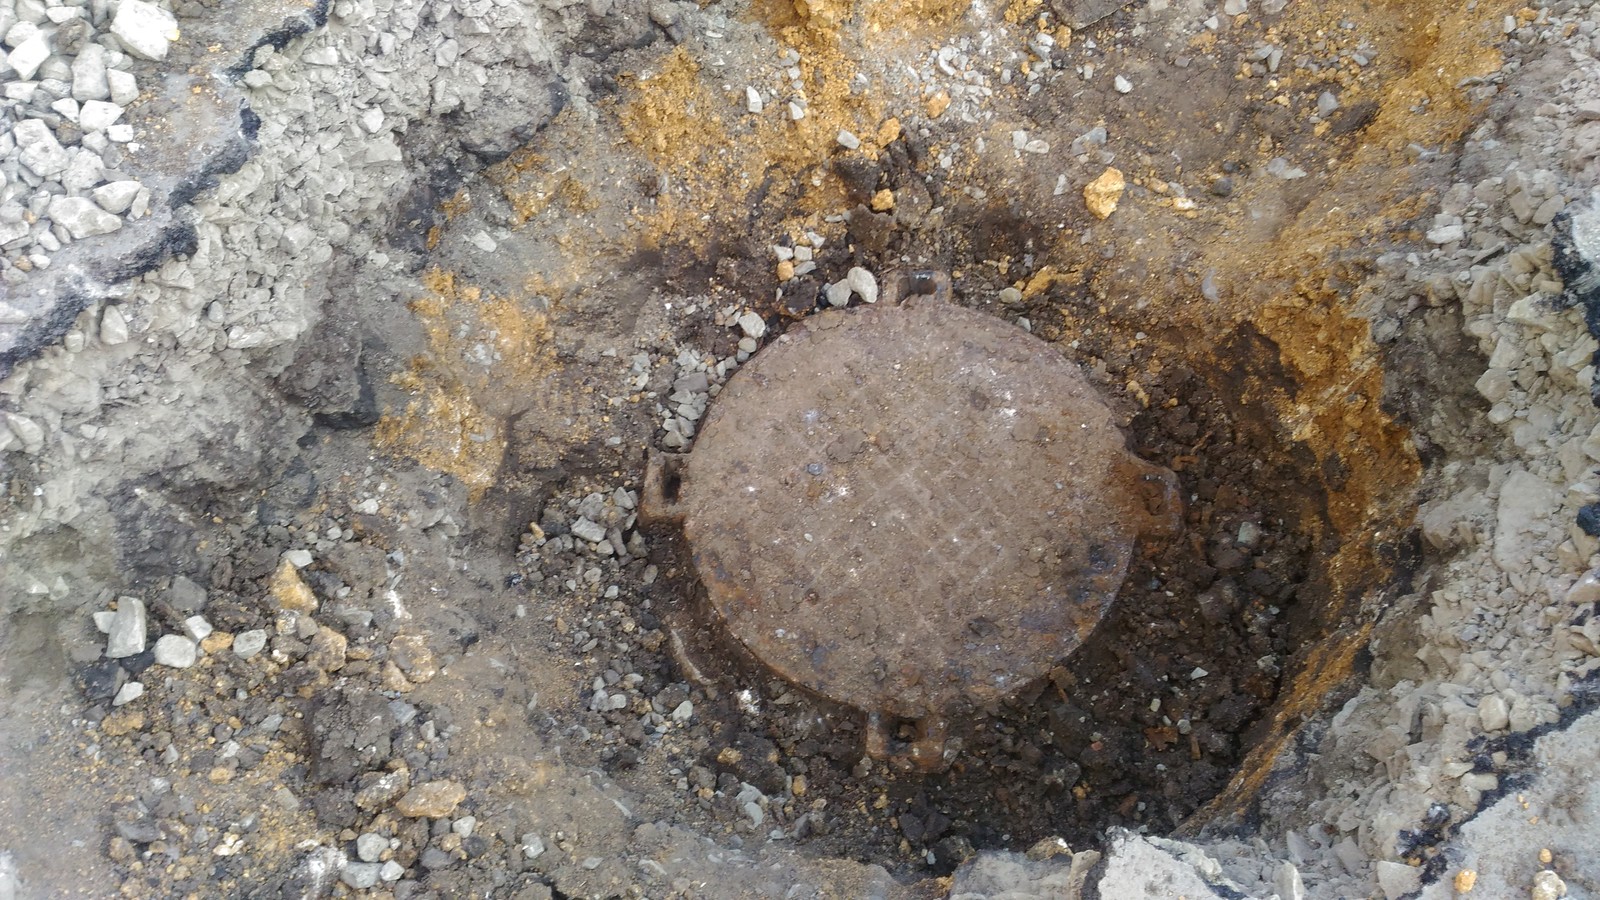 Traces of the ancient city found in Rostov - Rostov-on-Don, Road works